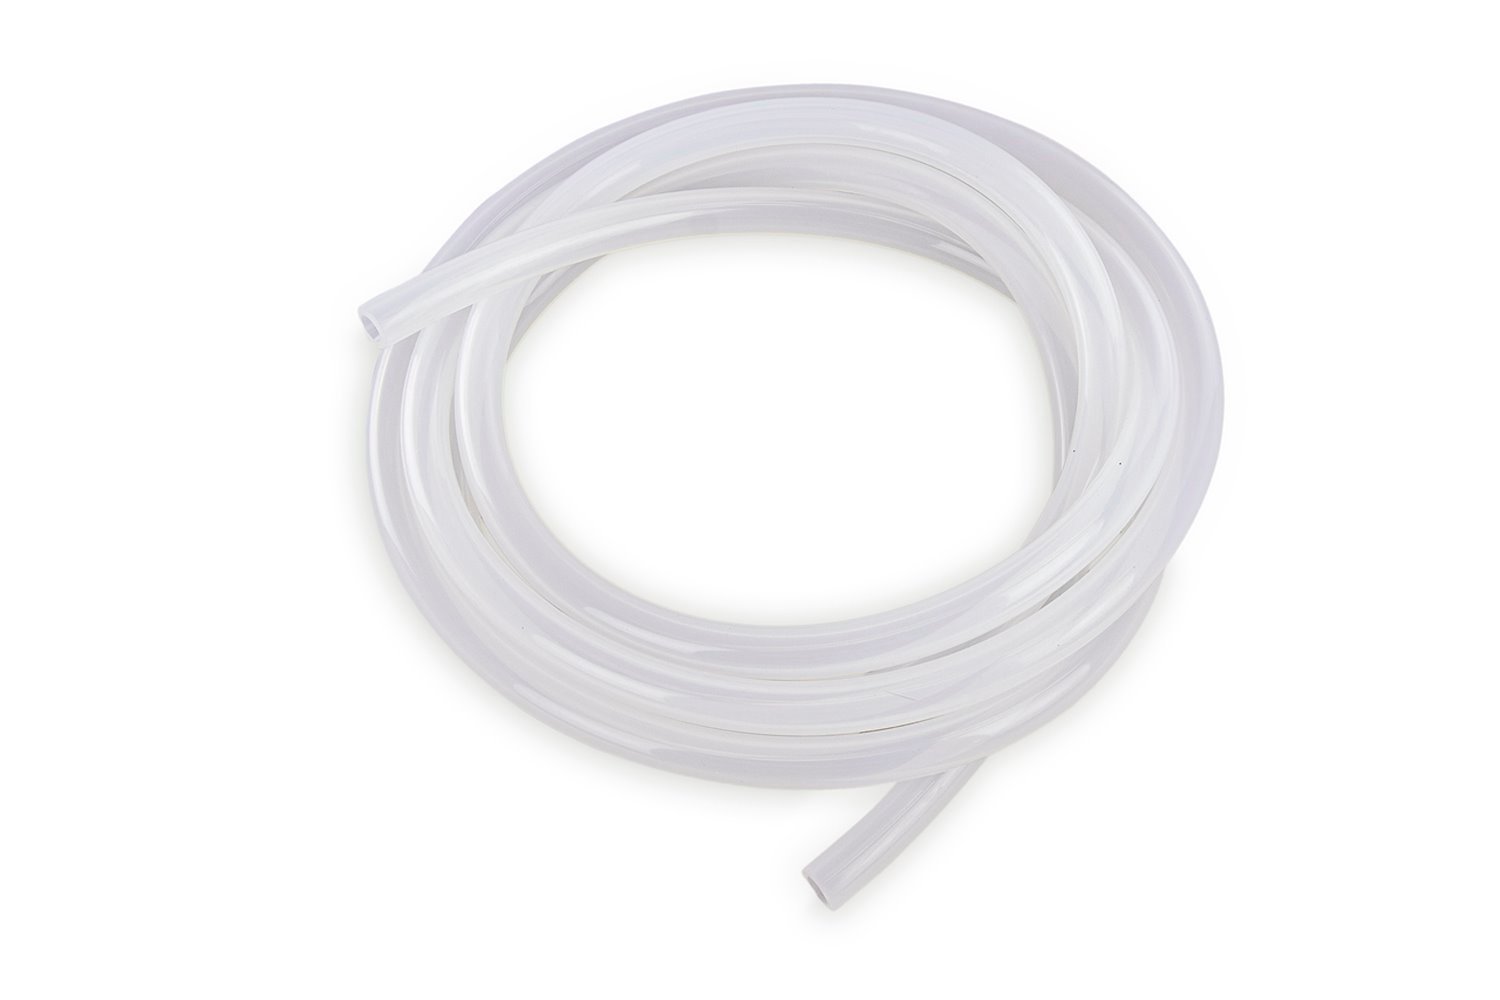 HTSVH10-CLEARx10 High-Temperature Silicone Vacuum Hose Tubing, 10 mm ID, 10 ft. Roll, Clear